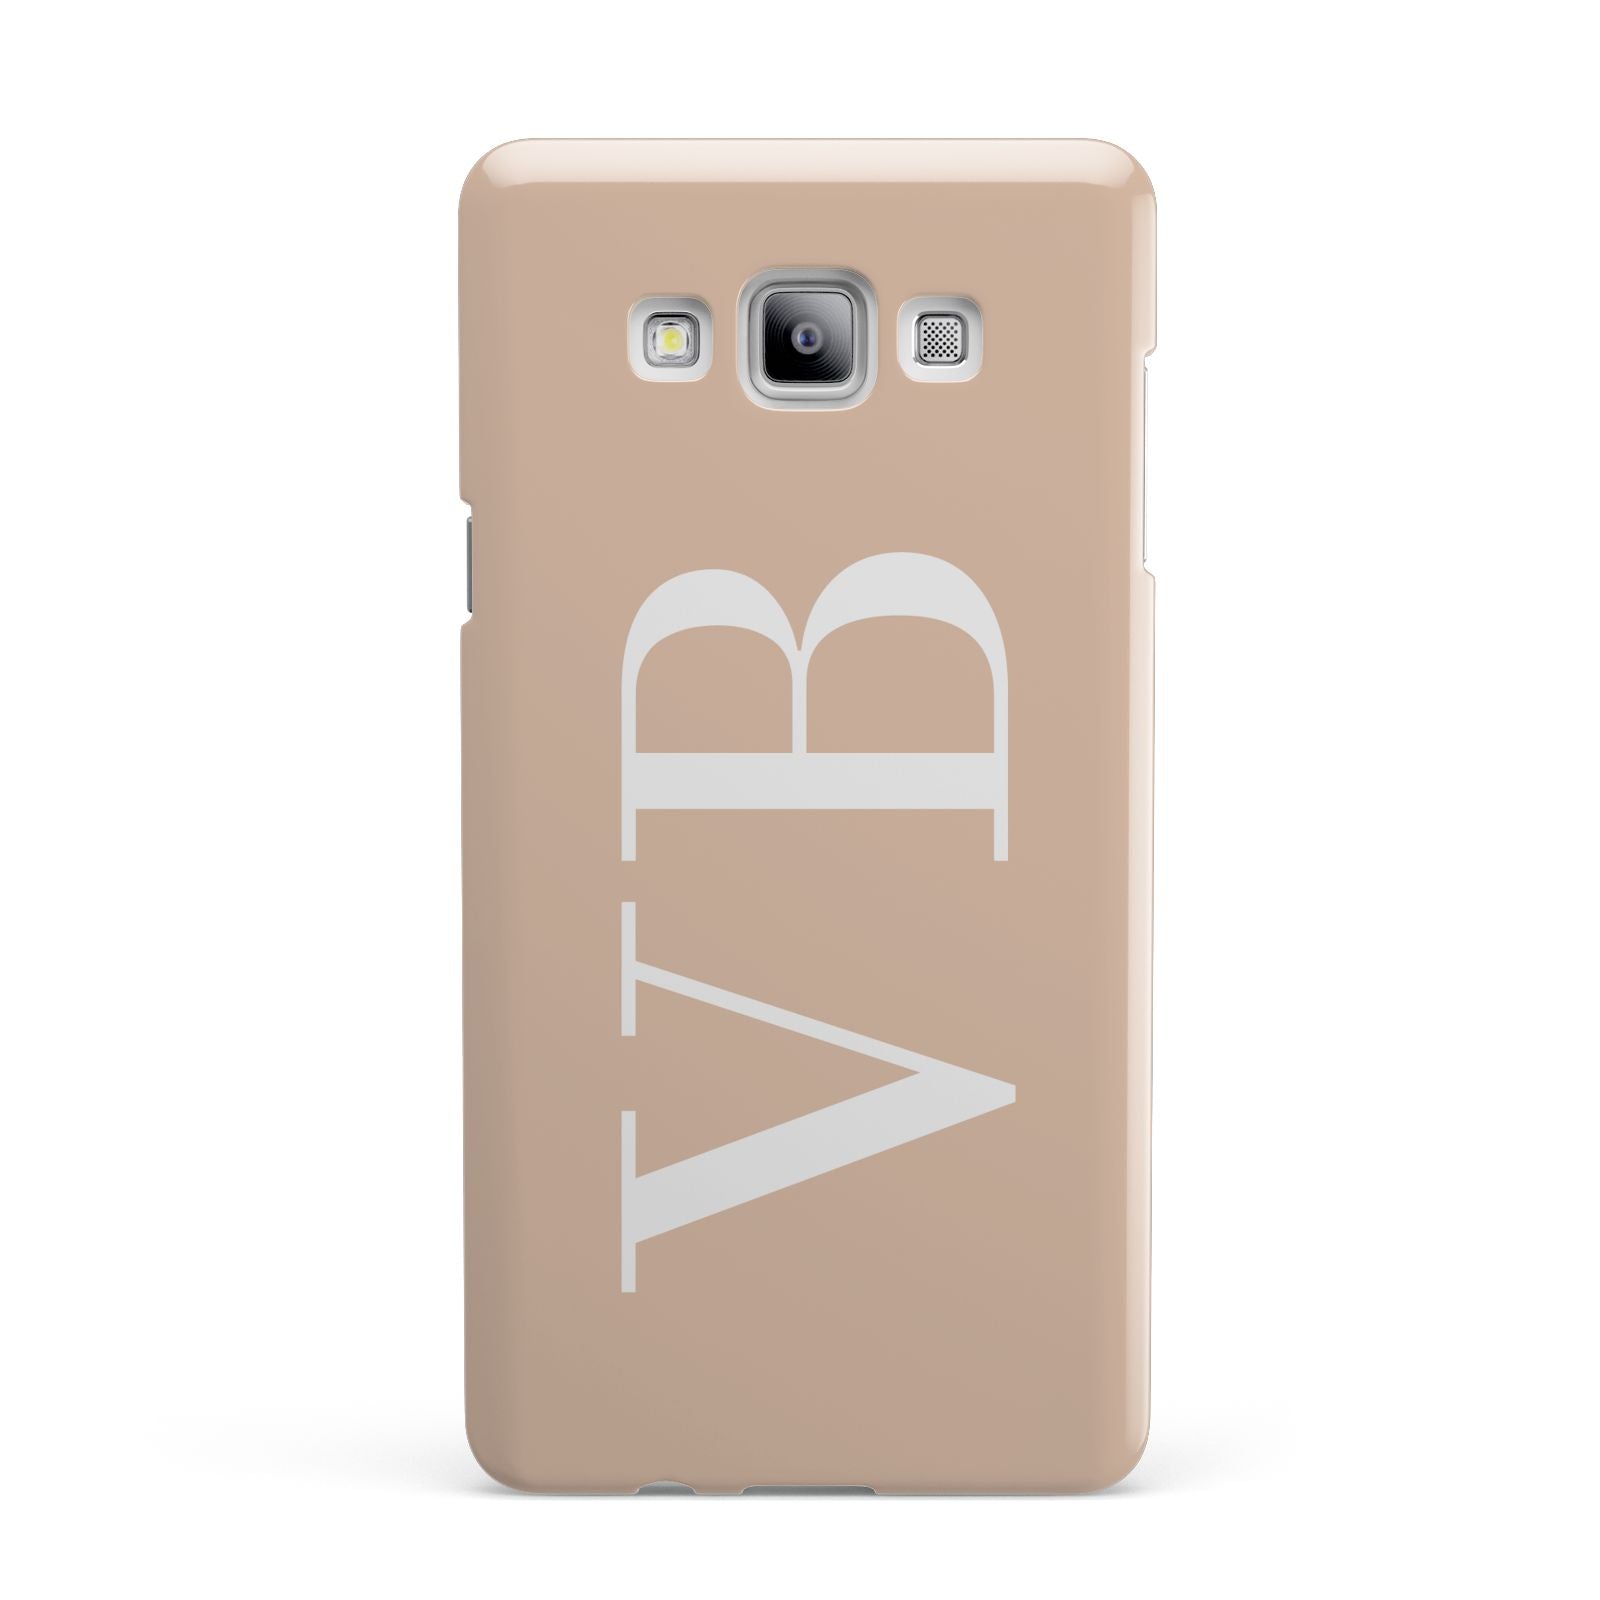 Nude And White Personalised Samsung Galaxy A7 2015 Case